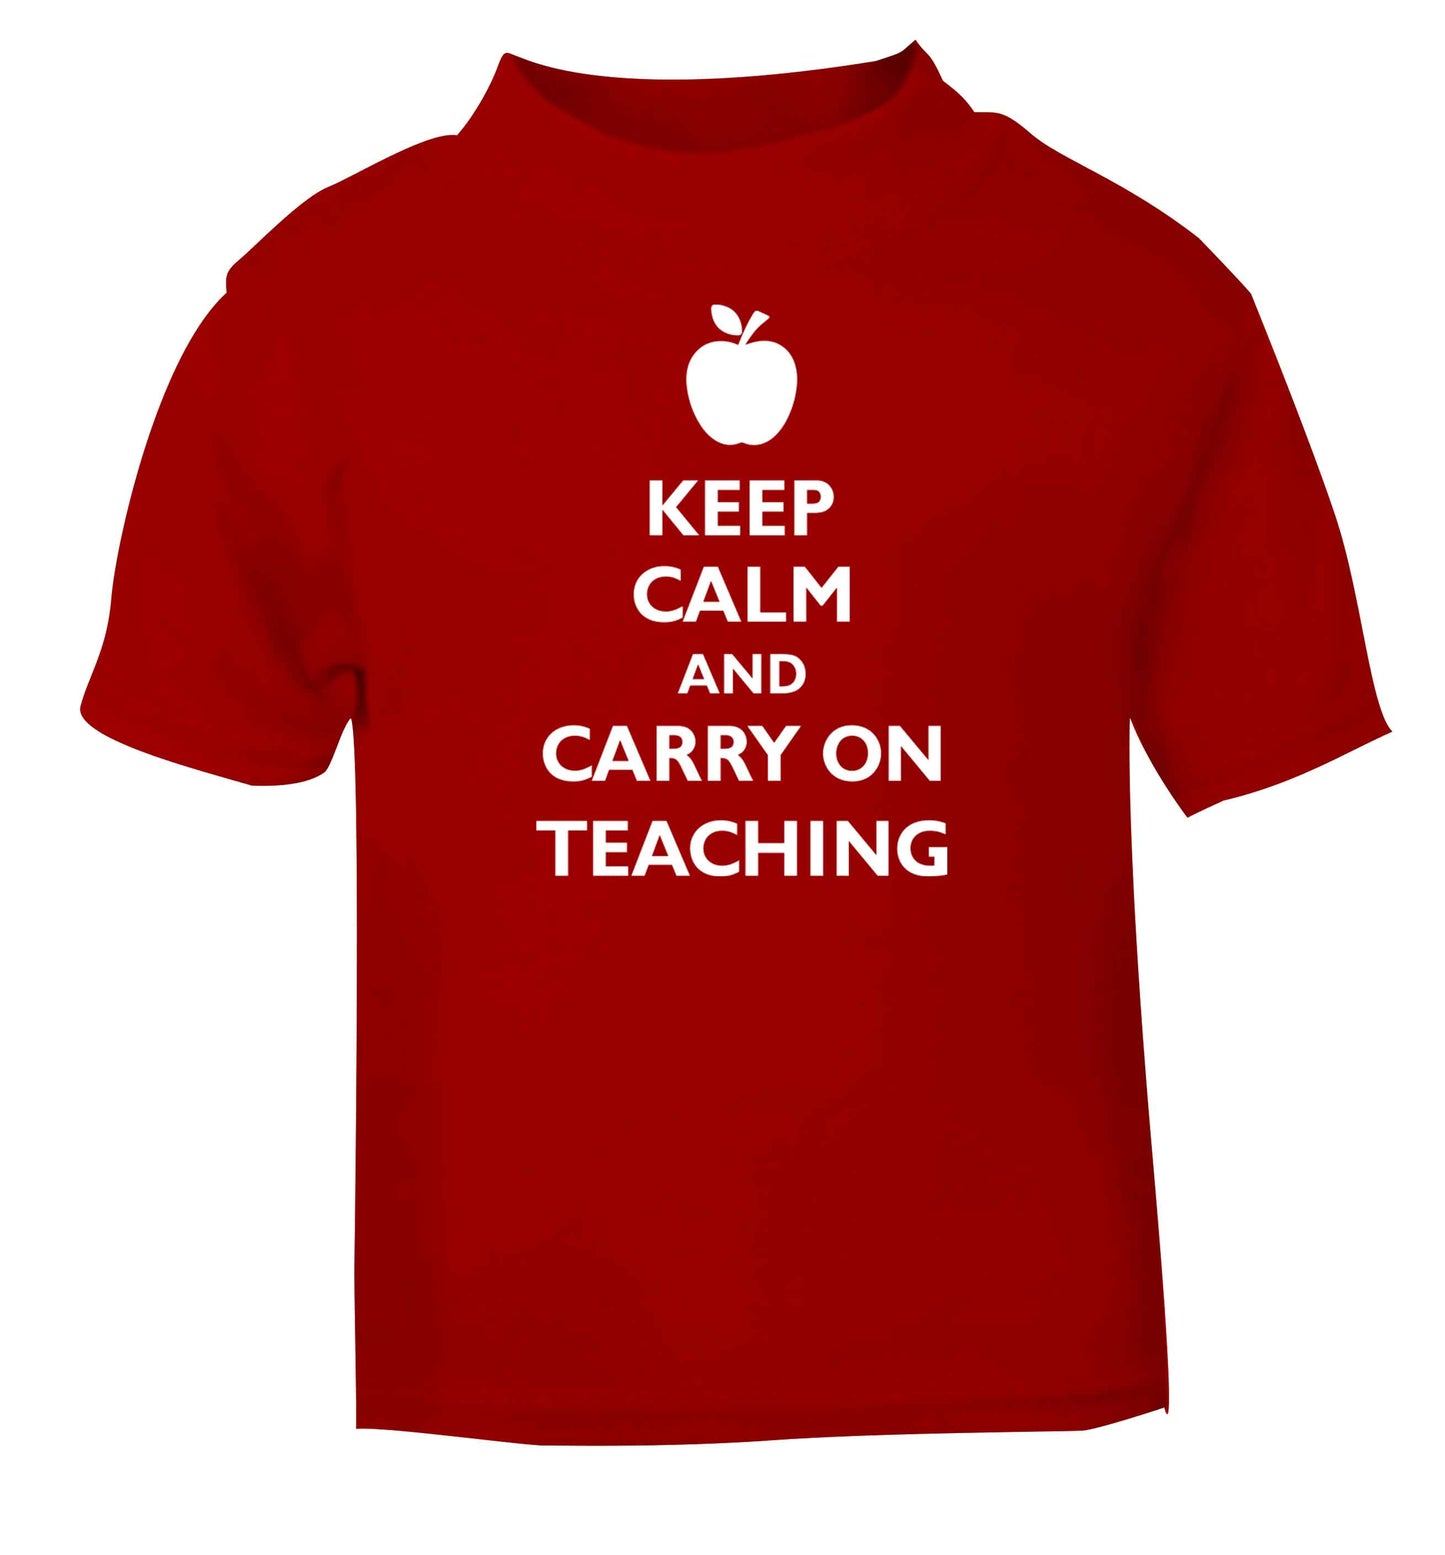 Keep calm and carry on teaching red baby toddler Tshirt 2 Years